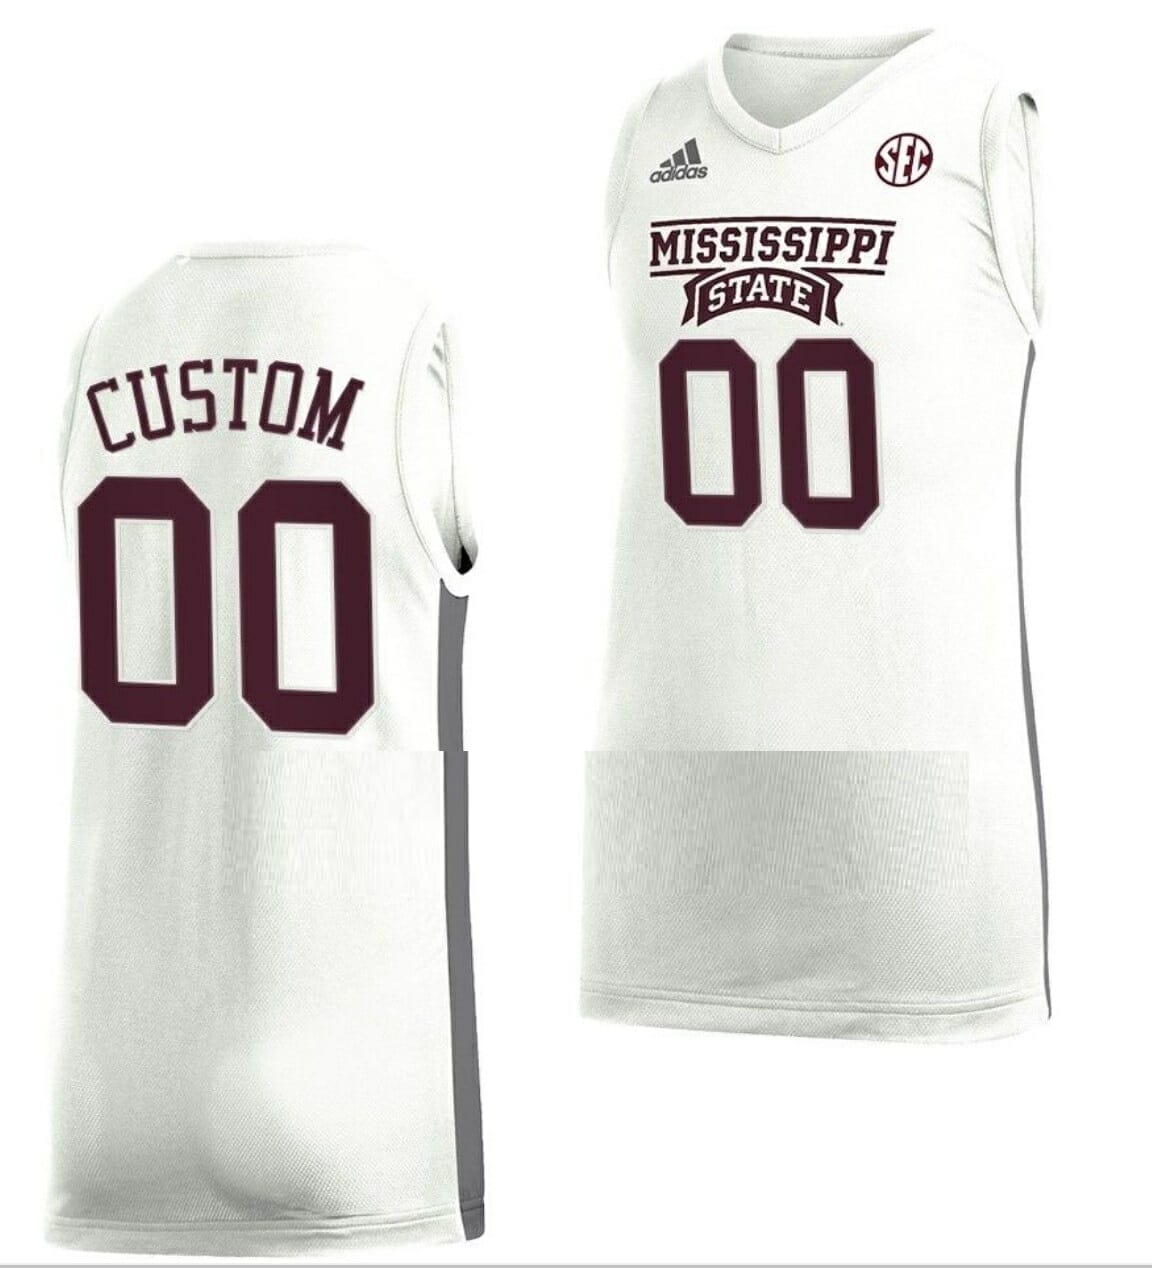 Men's Maroon Mississippi State Bulldogs Basketball Jersey